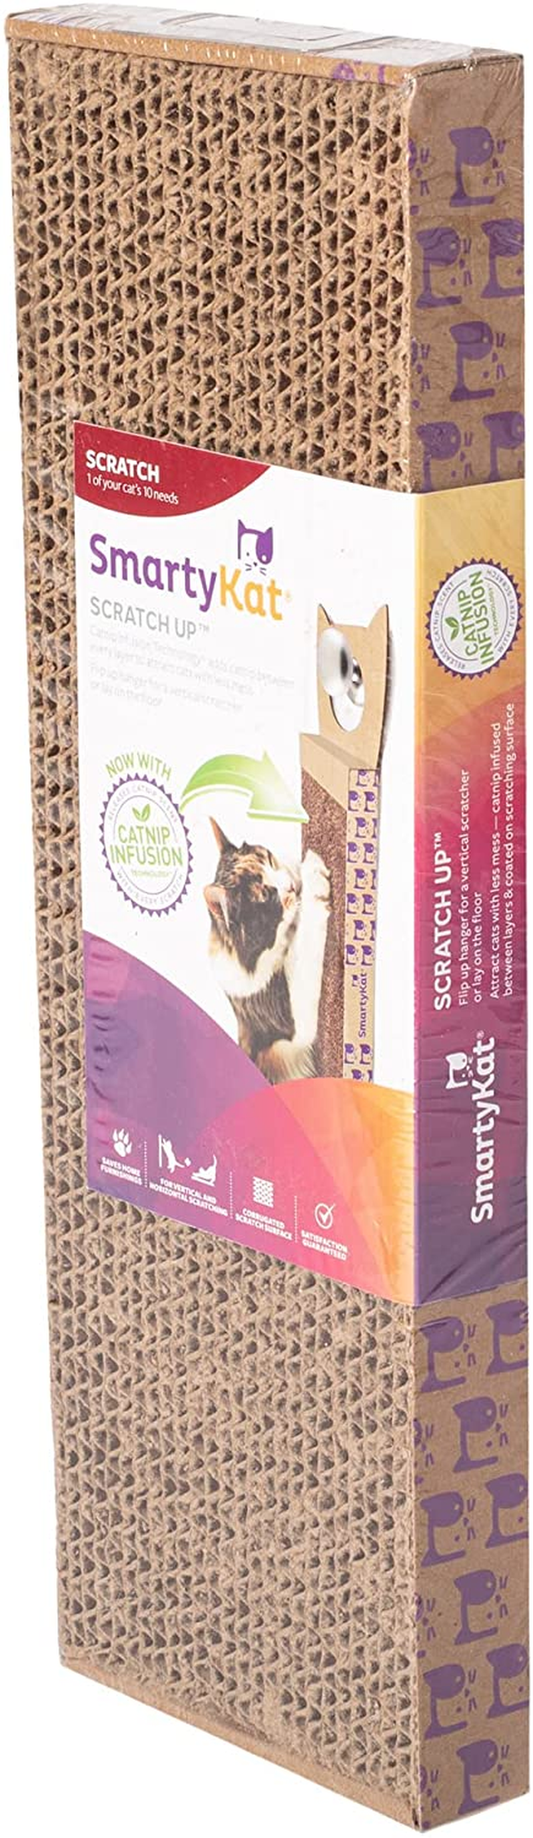 Smartykat Scratch up Hanging Corrugated Cat Scratchers for Cats & Kittens, Stimulating, Promotes Healthy Nail Growth